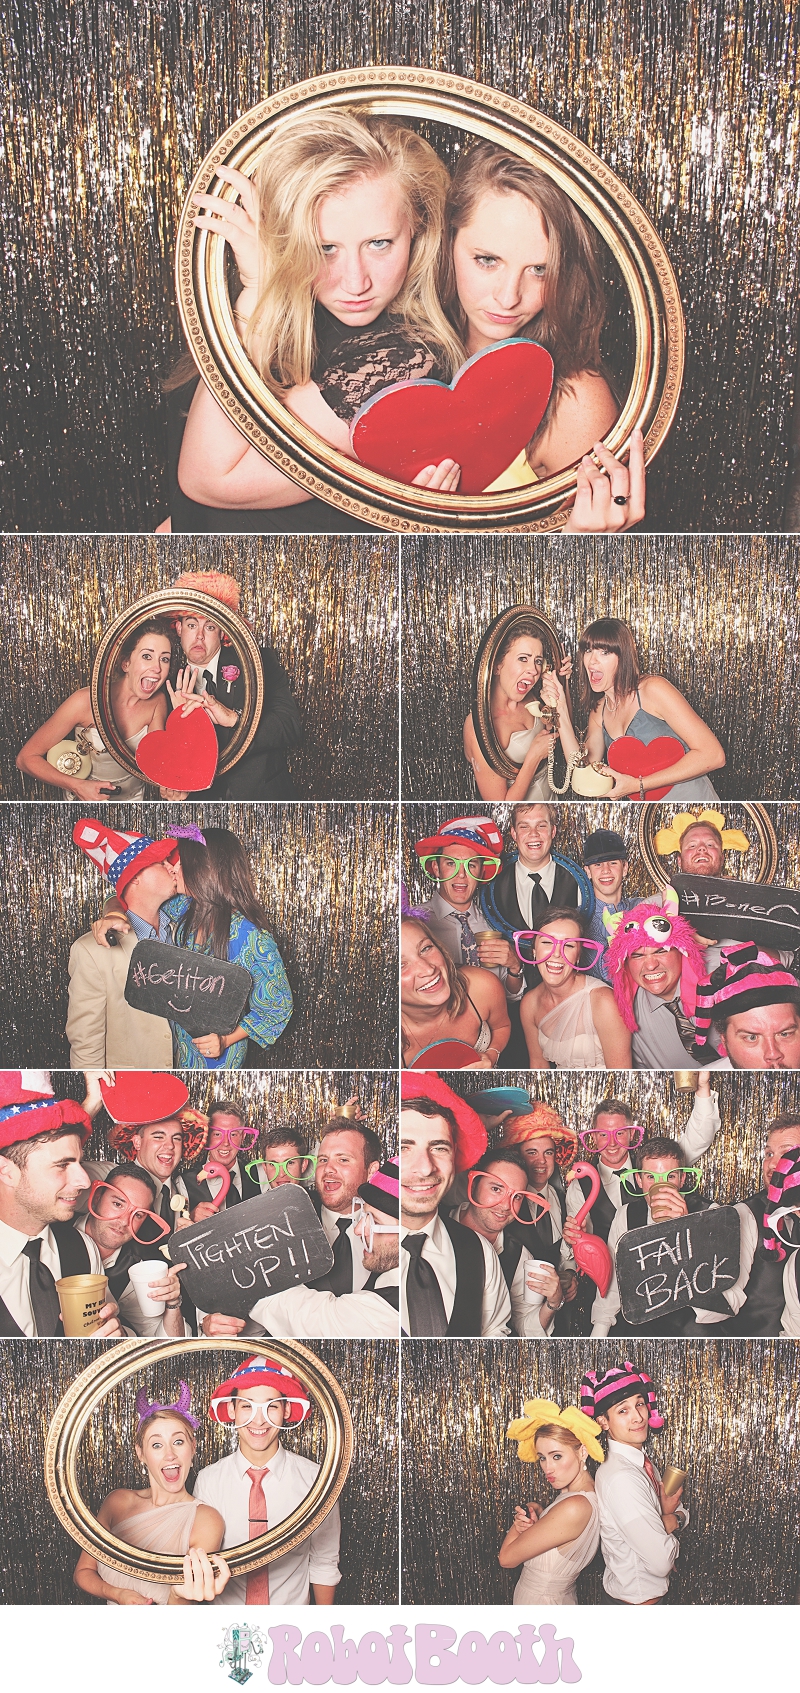 Atlanta Roswell Historic Cottage PhotoBooth - Chelsea and Reese's Wedding - RobotBooth 2